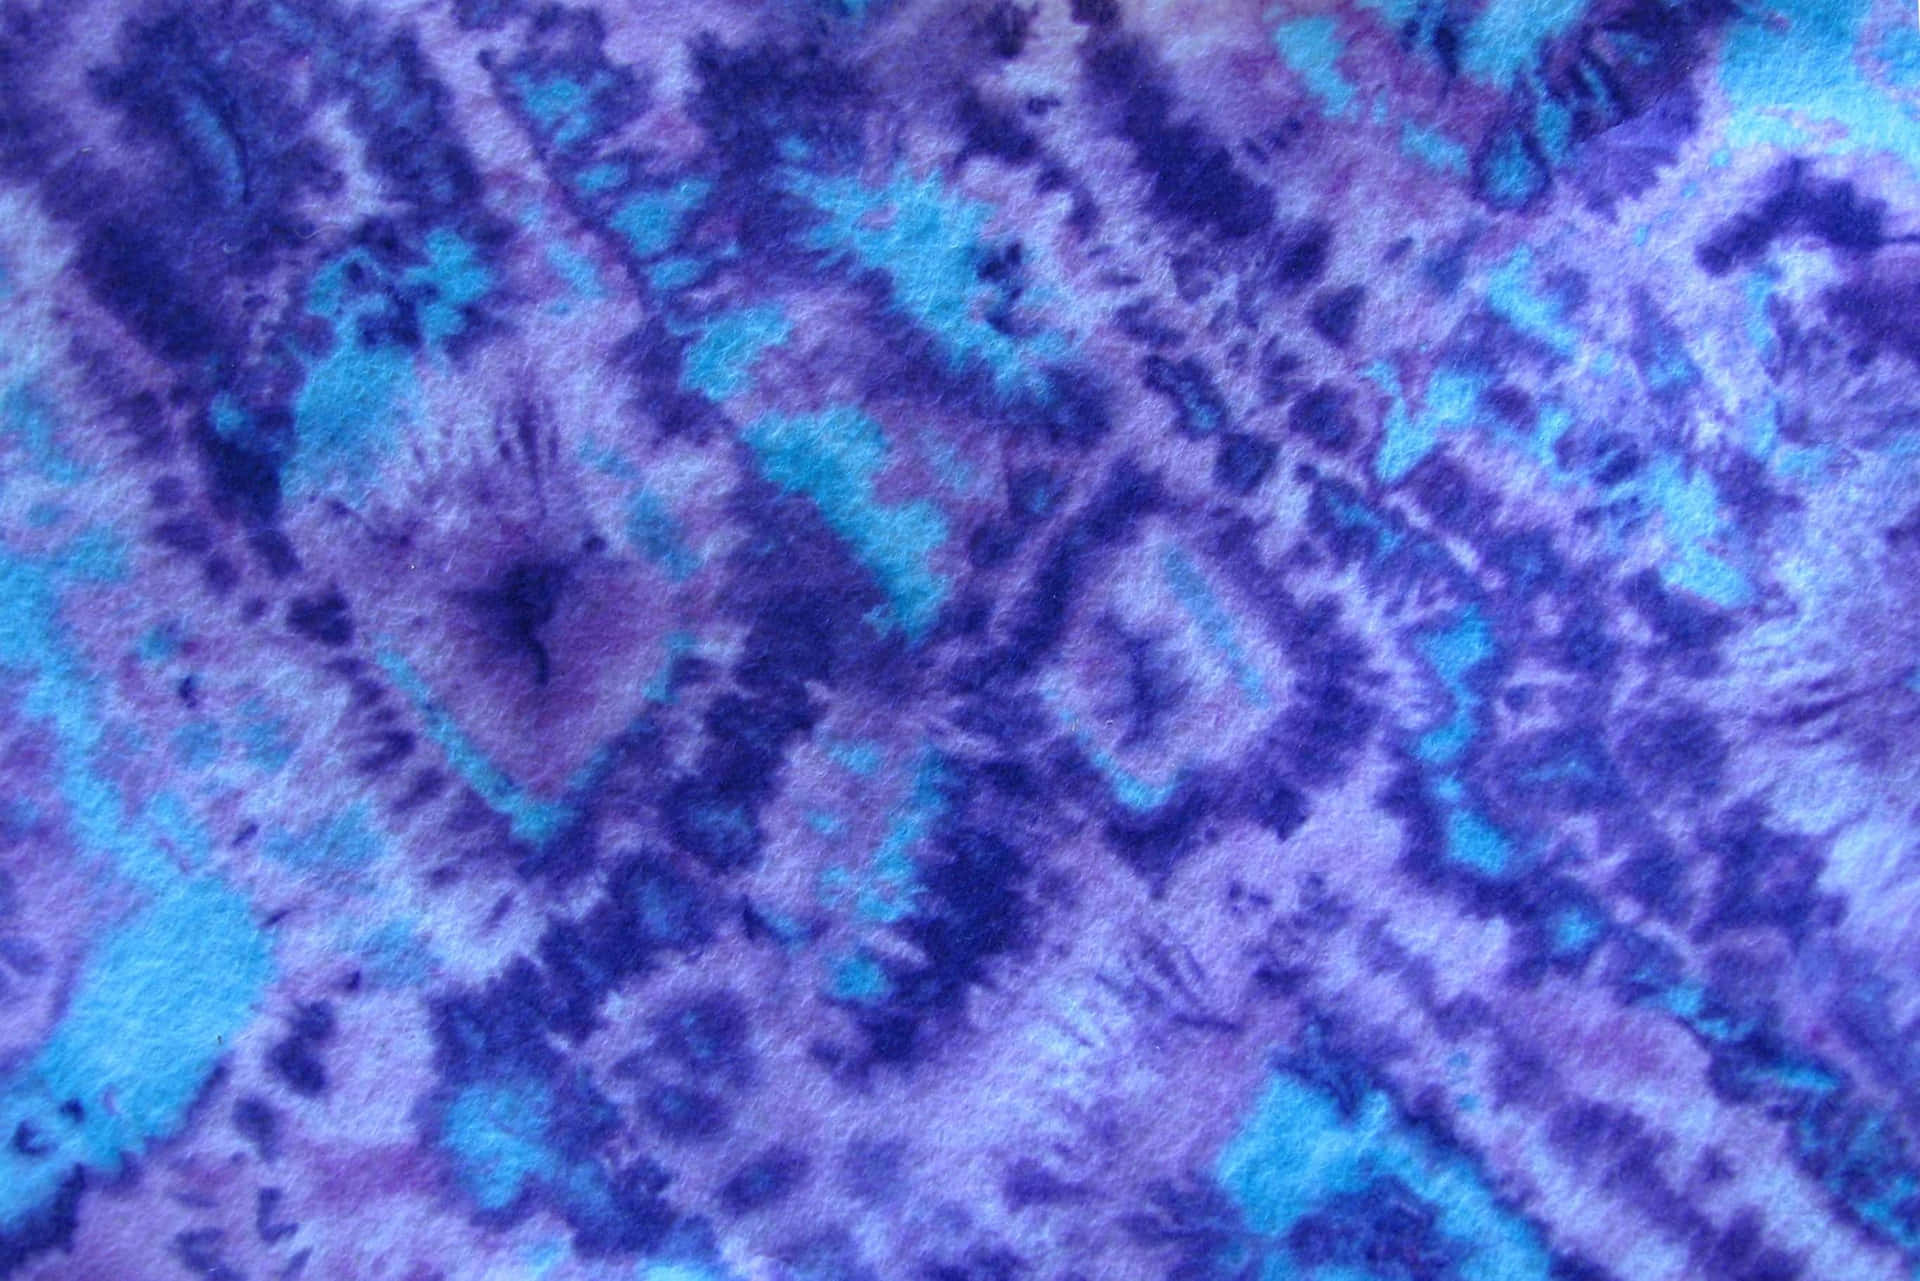 A Close Up Of A Purple And Blue Tie Dye Fabric